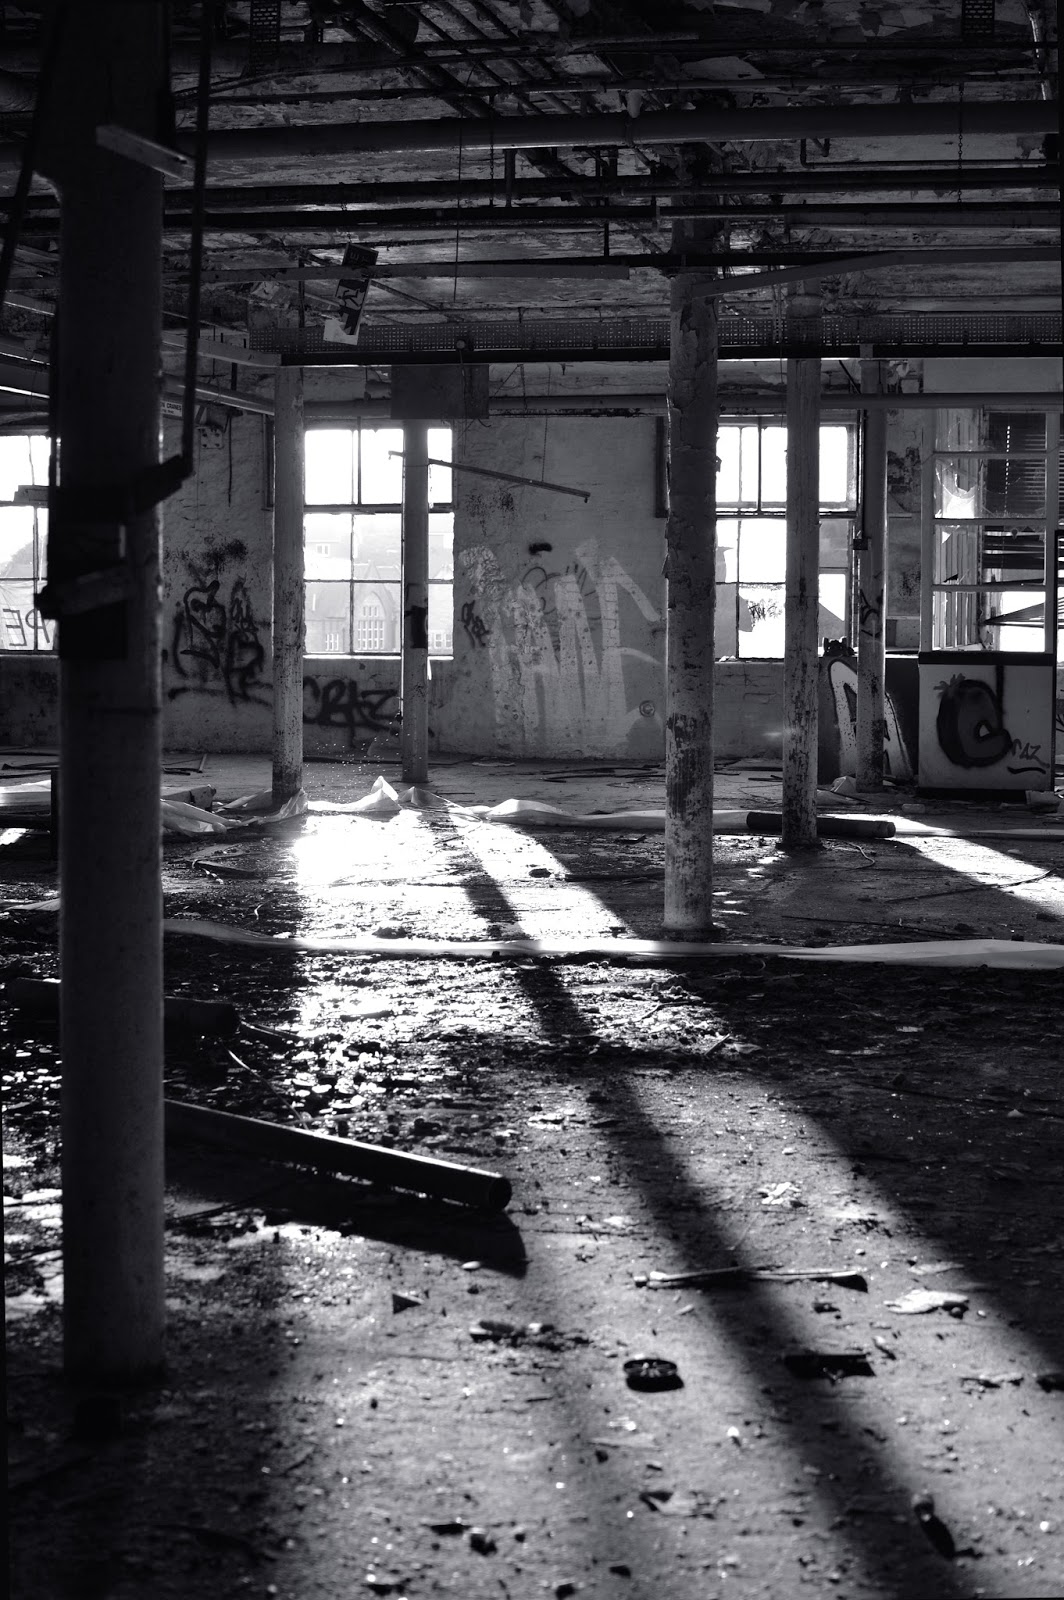 urbex, photography, black and white, tone, atmosphere, fothergill and harvey, rock nook mill, shadows, narrative, eerie, factory, abandoned, derelict, light, natural light, society, greater Manchester, Littleborough, industrial revolution, ruins, apocalypse, separation, place, explore, adventure, 